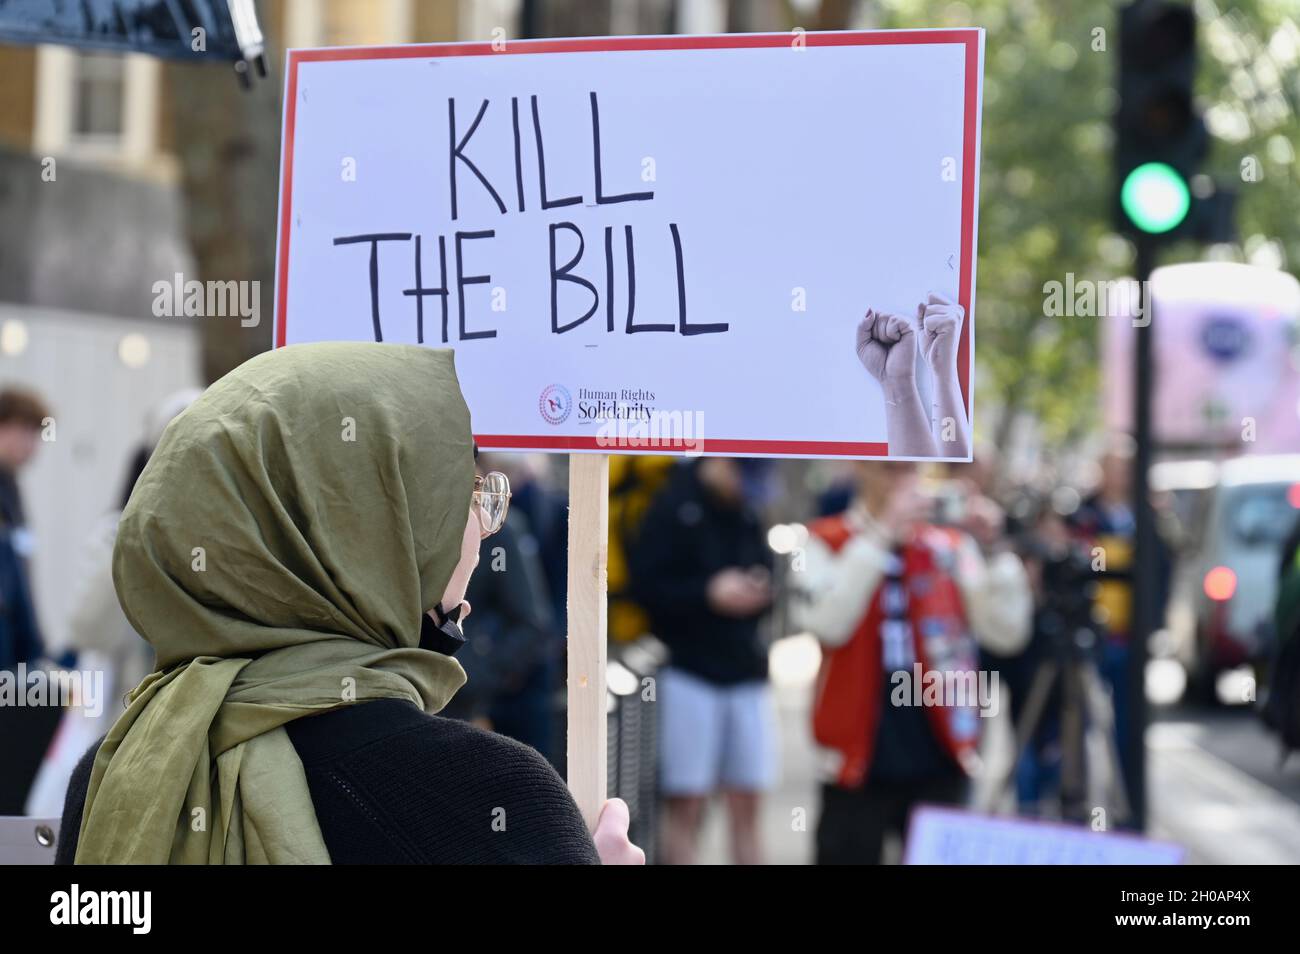 Kill The Bill protesters rally against government legislation aimed at curtailing disruptive protests, Downing Street, Whitehall, London. UK Stock Photo